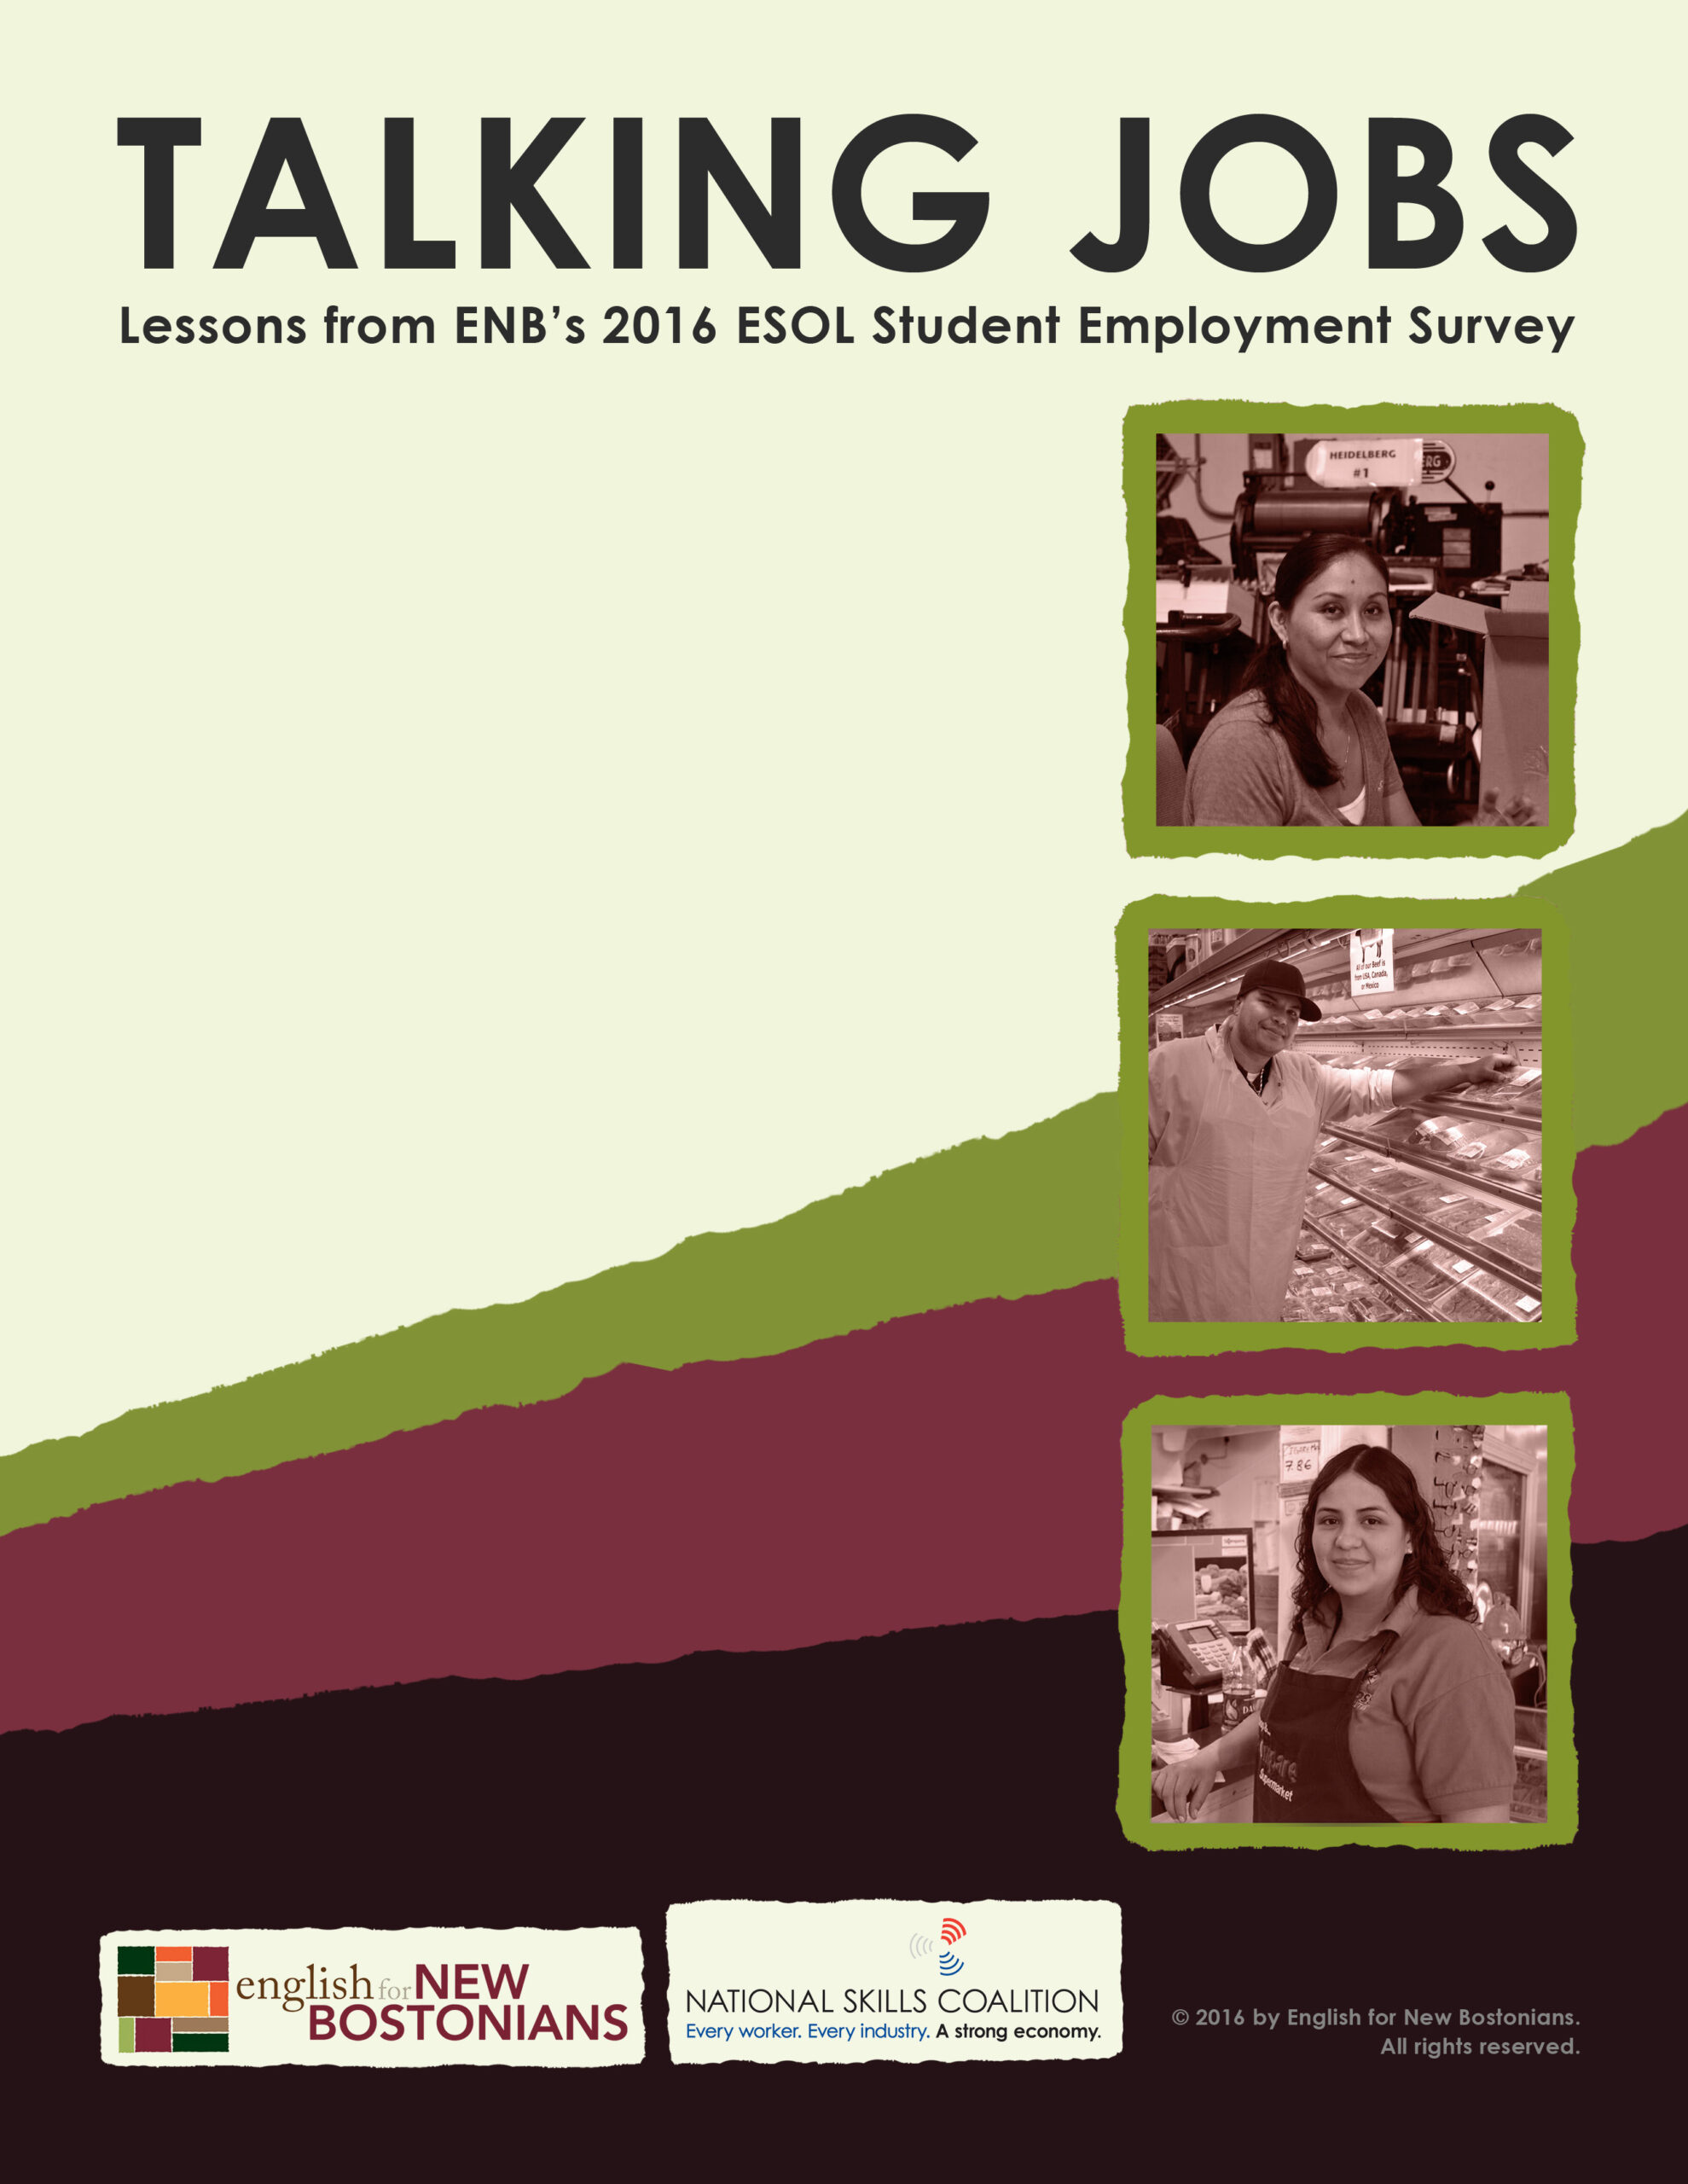 New data highlights importance of English classes for immigrant workers in Massachusetts